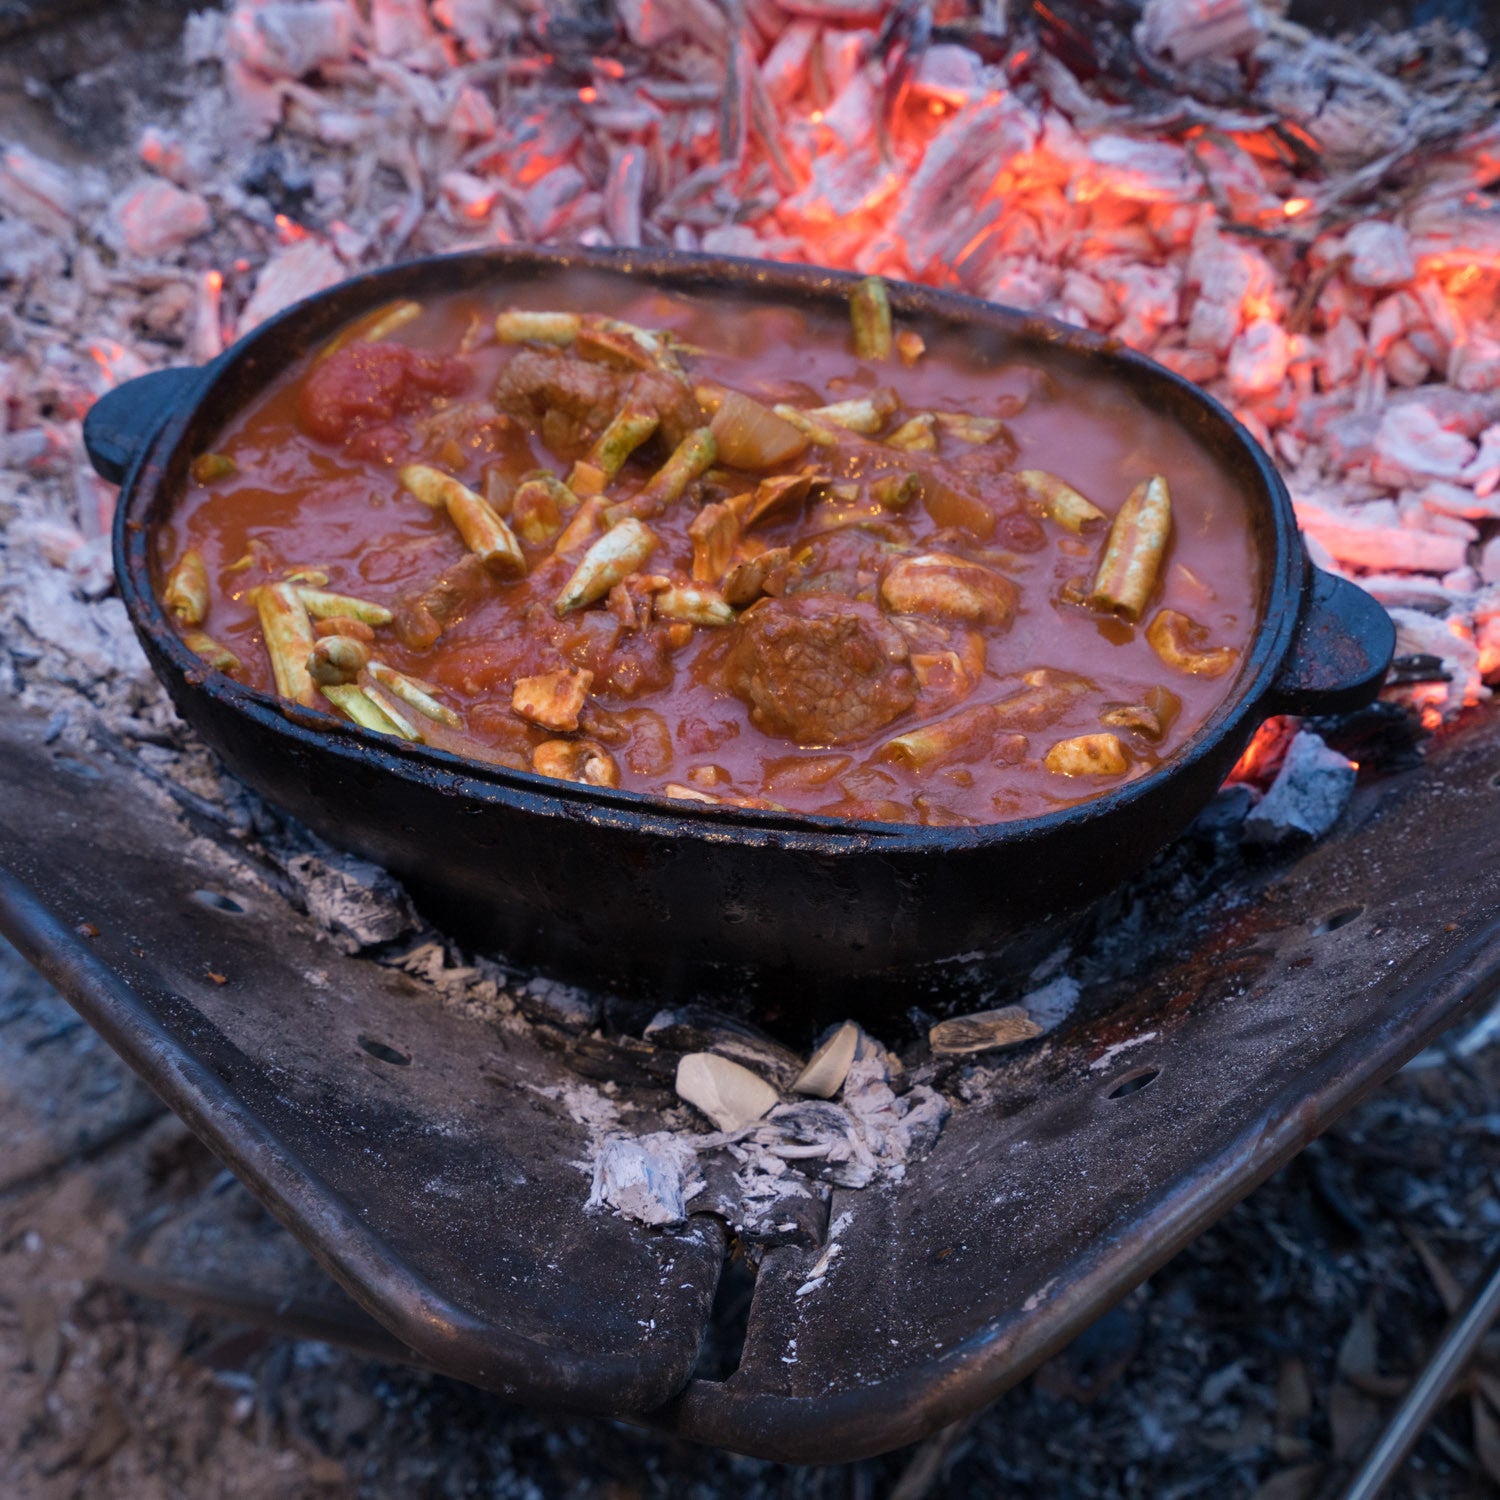 Campfire Lamb and Vegetable Stew